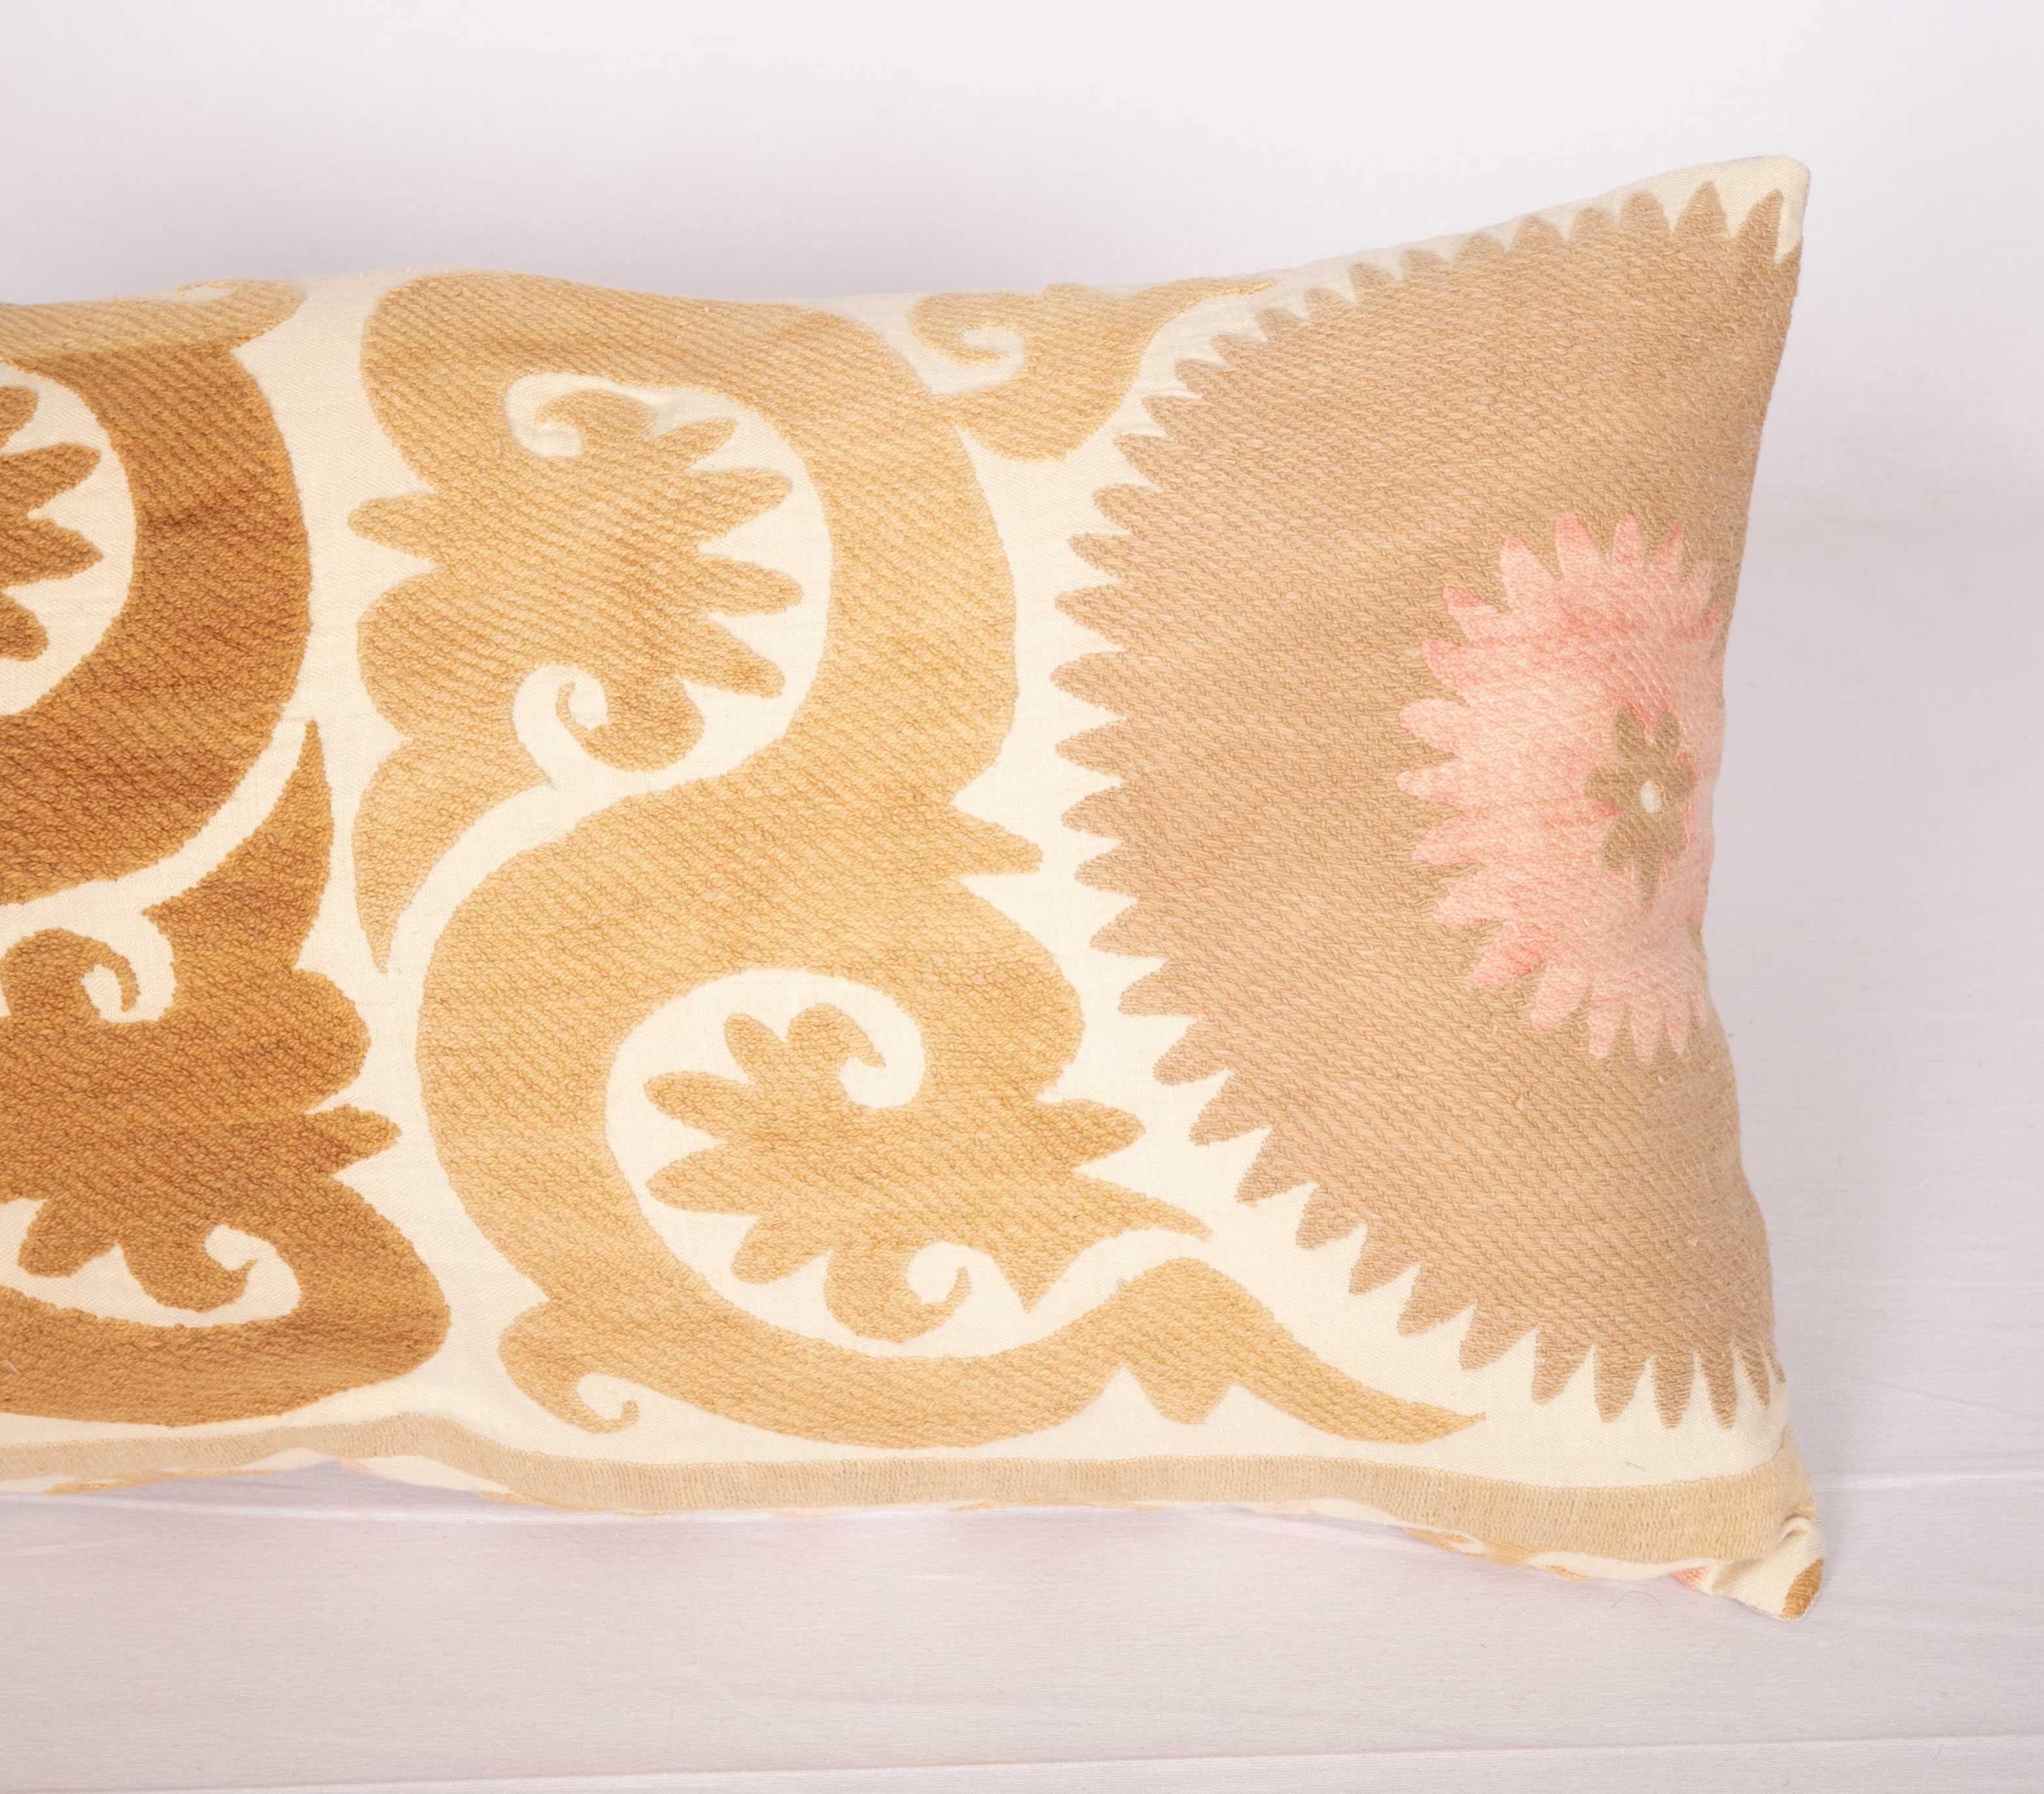 Embroidered Vintage Suzani Pillow Fashioned from a Mid-20th Century Samarkand Suzani For Sale